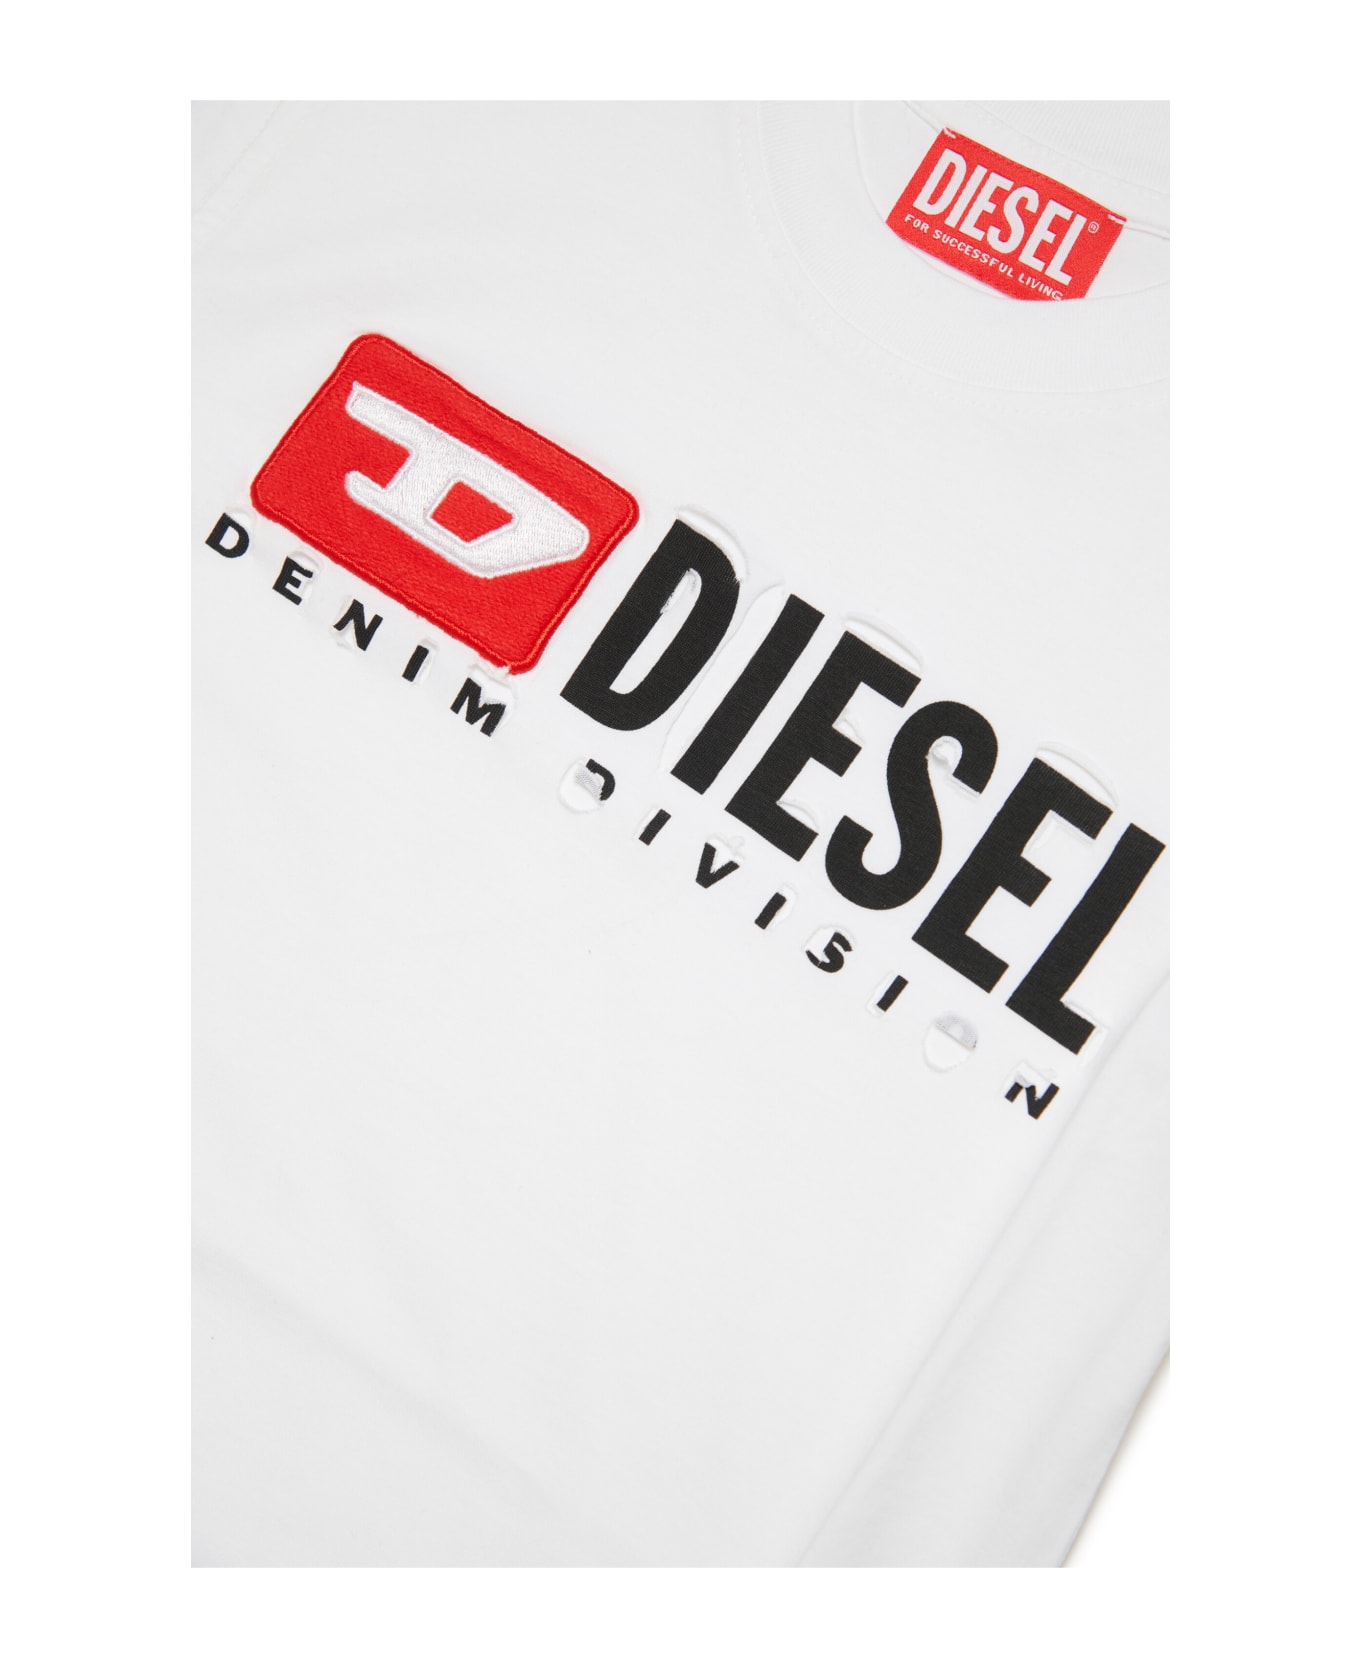 Diesel Tinydivstroyed T-shirt Diesel T-shirt With Breaks And Logo - White Tシャツ＆ポロシャツ